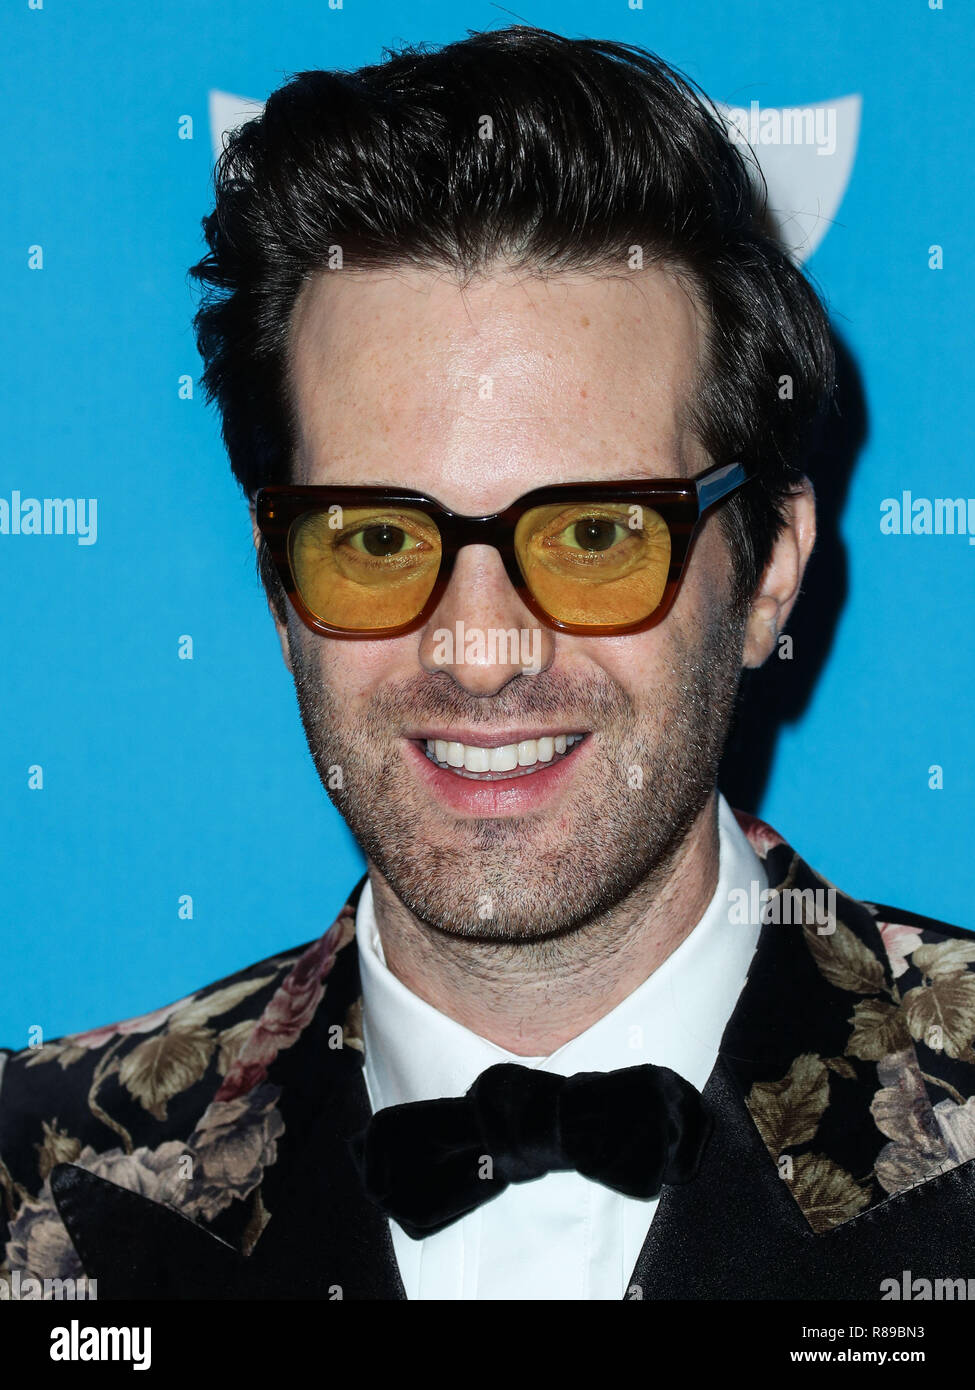 LOS ANGELES, CA, USA - OCTOBER 25: Mayer Hawthorne at the Sixth Annual UNICEF Masquerade Ball held at Clifton's Republic on October 25, 2018 in Los Angeles, California, United States. (Photo by Xavier Collin/Image Press Agency) Stock Photo